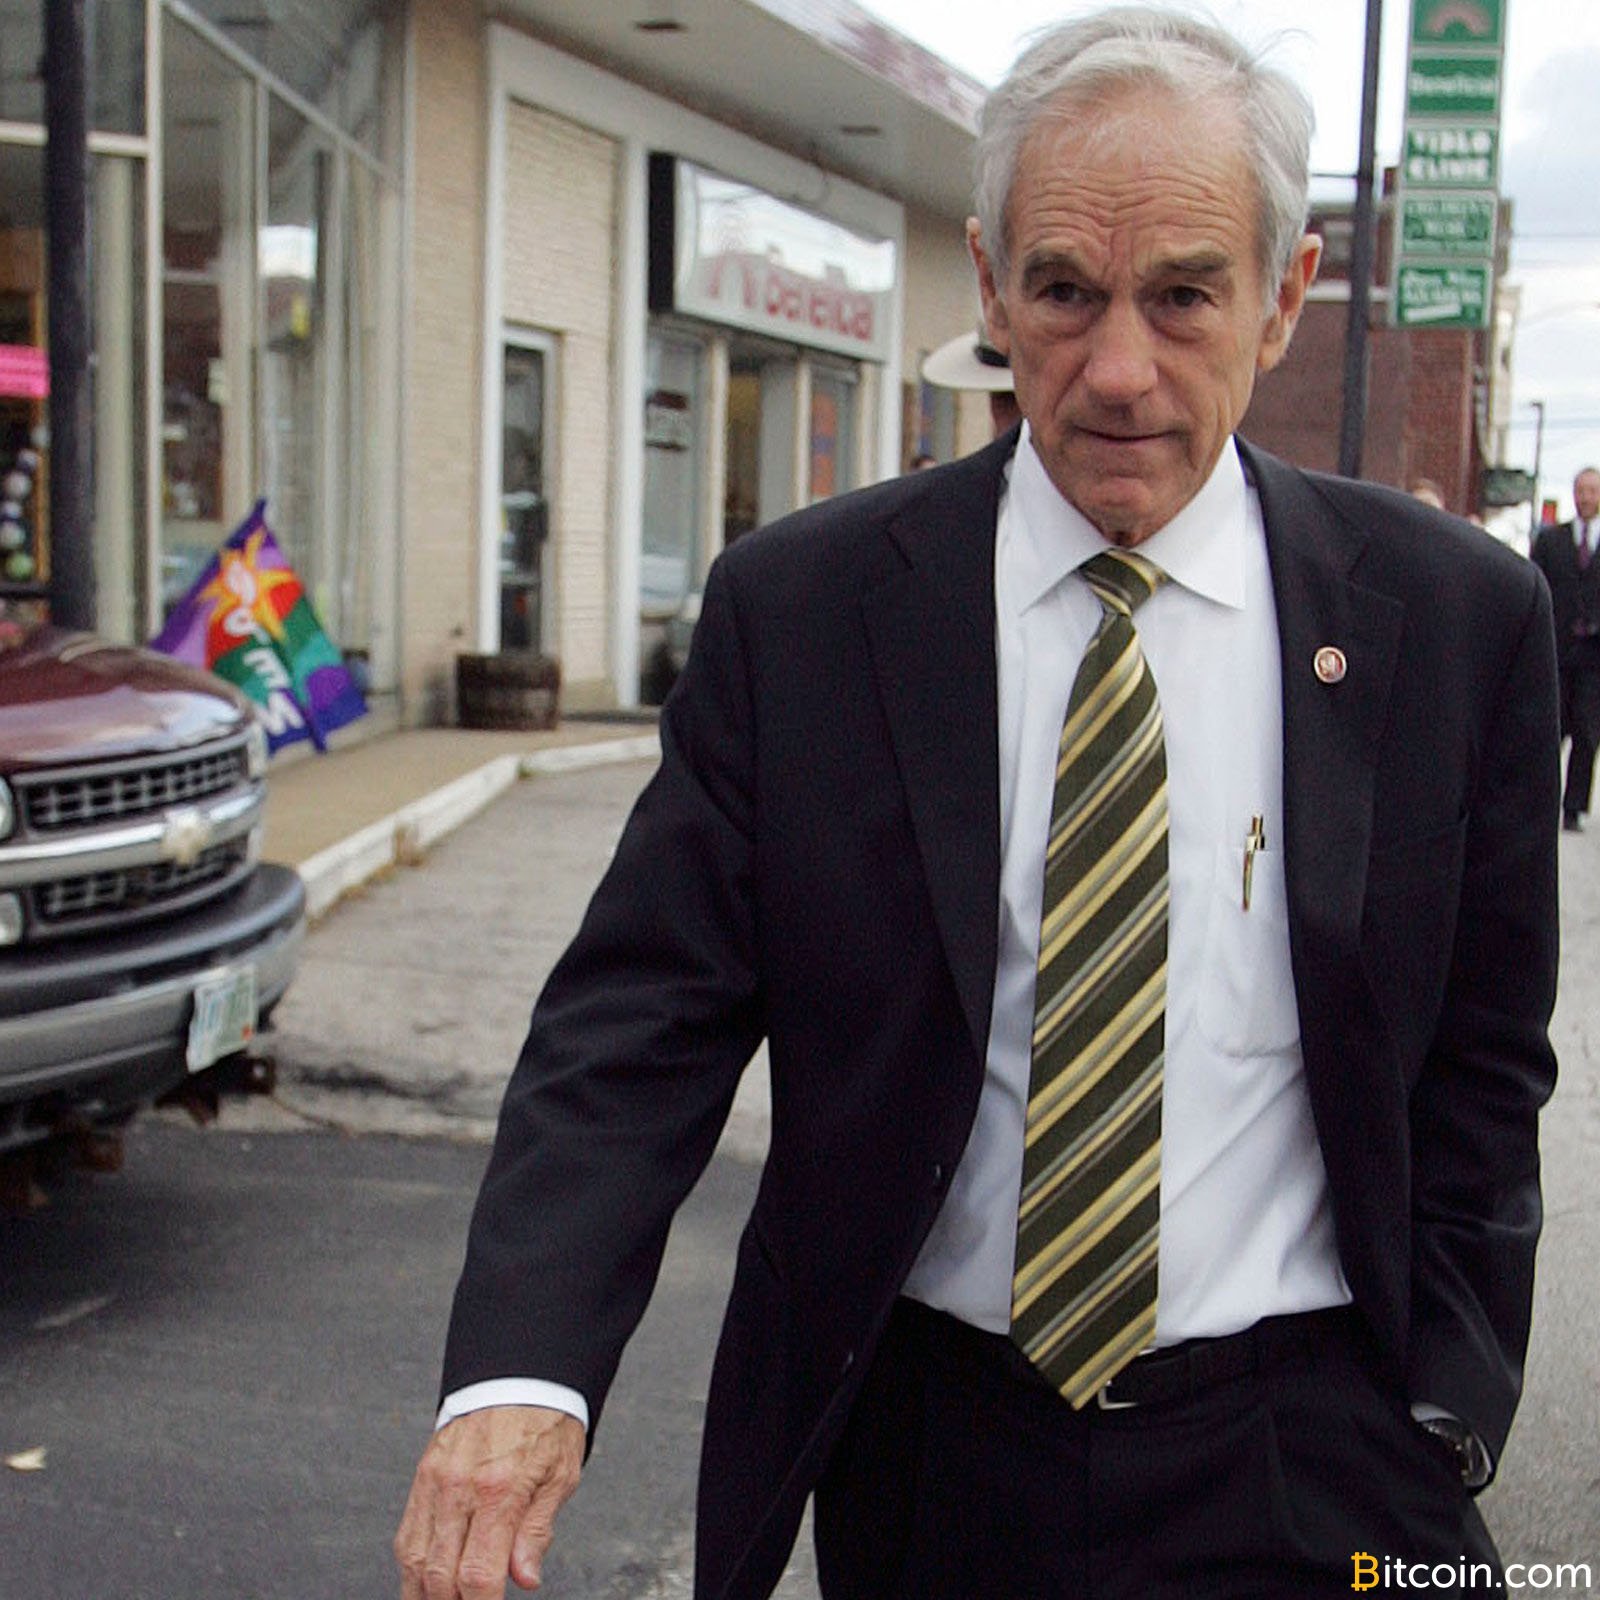 'End the Fed' Evangelist Ron Paul Plugs Bitcoin IRA for Retirement